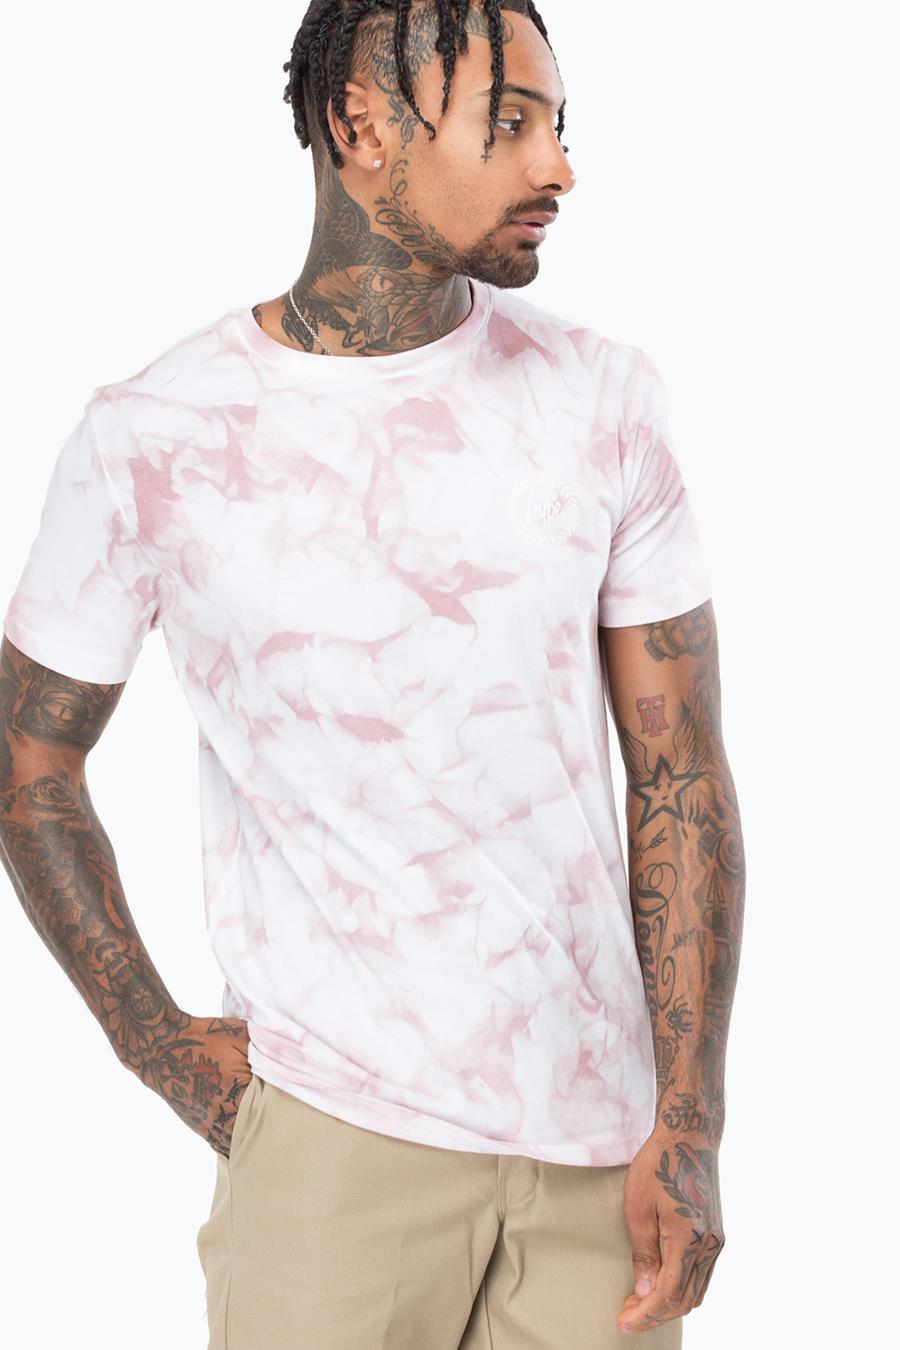 mens pink t shirt outfit